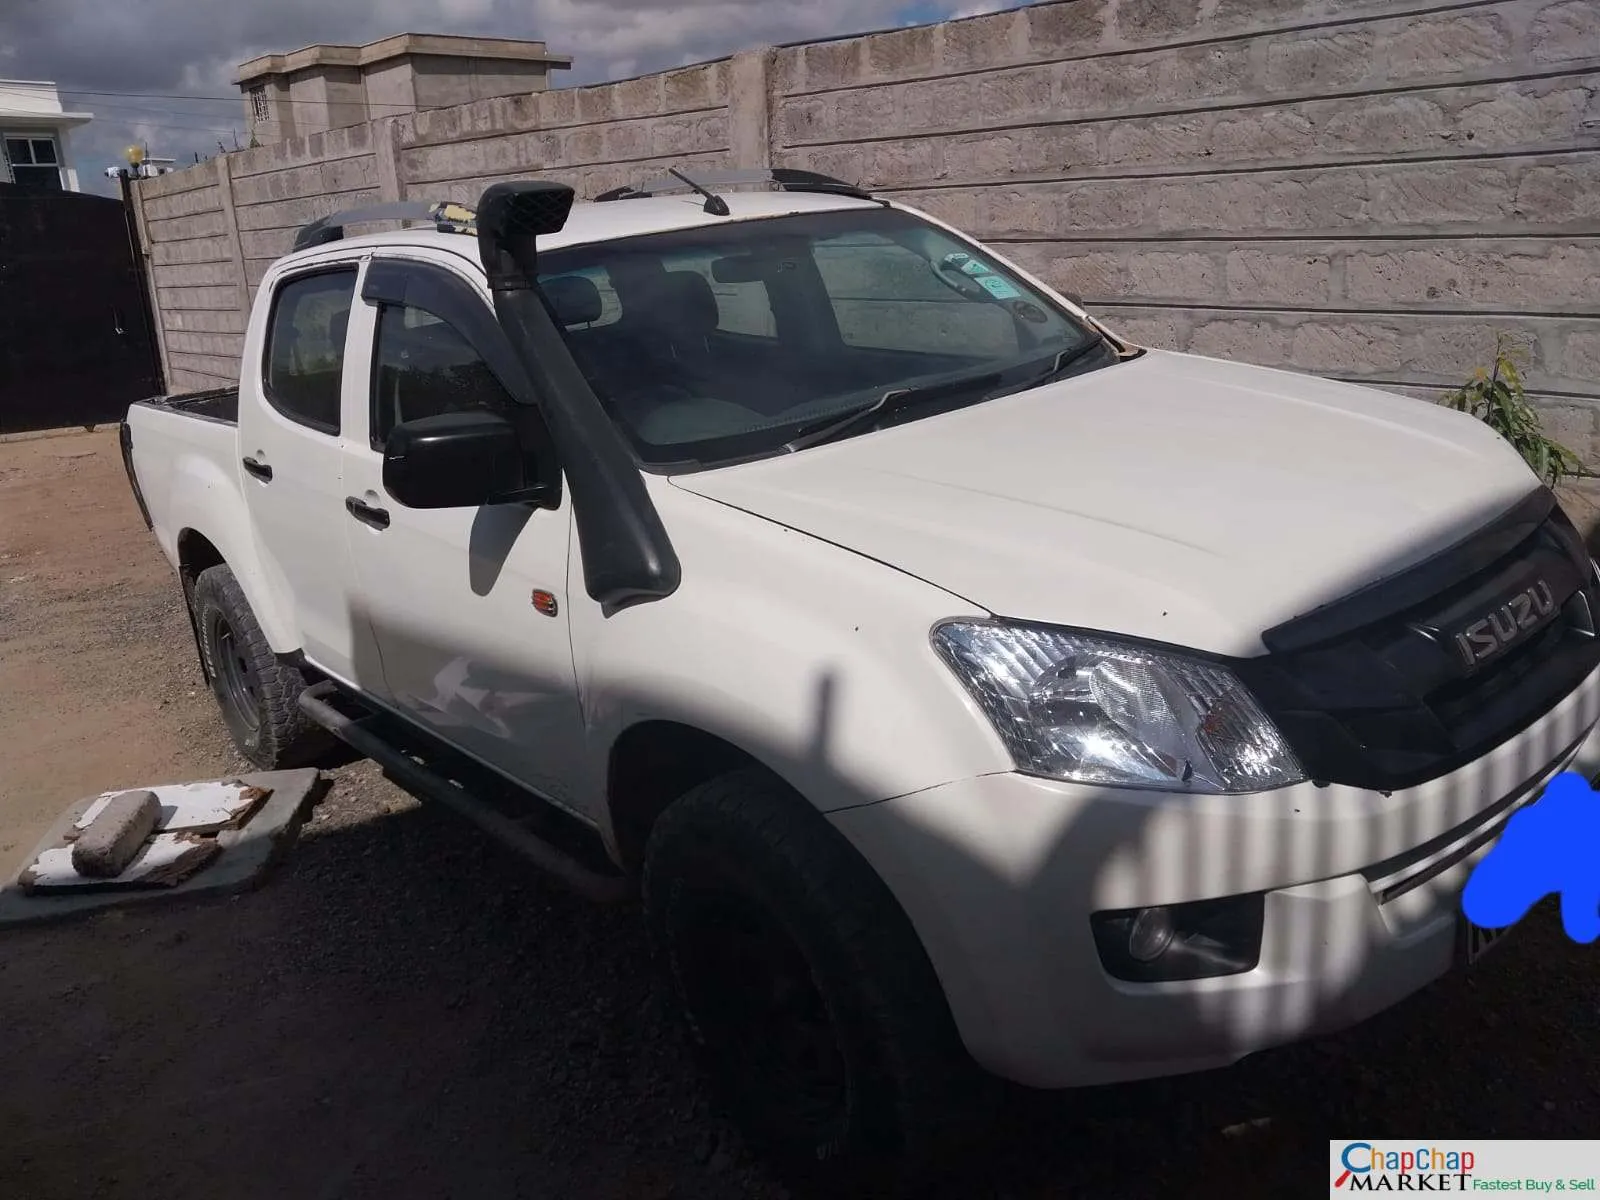 Cars Cars For Sale/Vehicles-Isuzu D-max DMAX local assembly CHEAPEST YOU PAY 40% DEPOSIT Exclusive 8